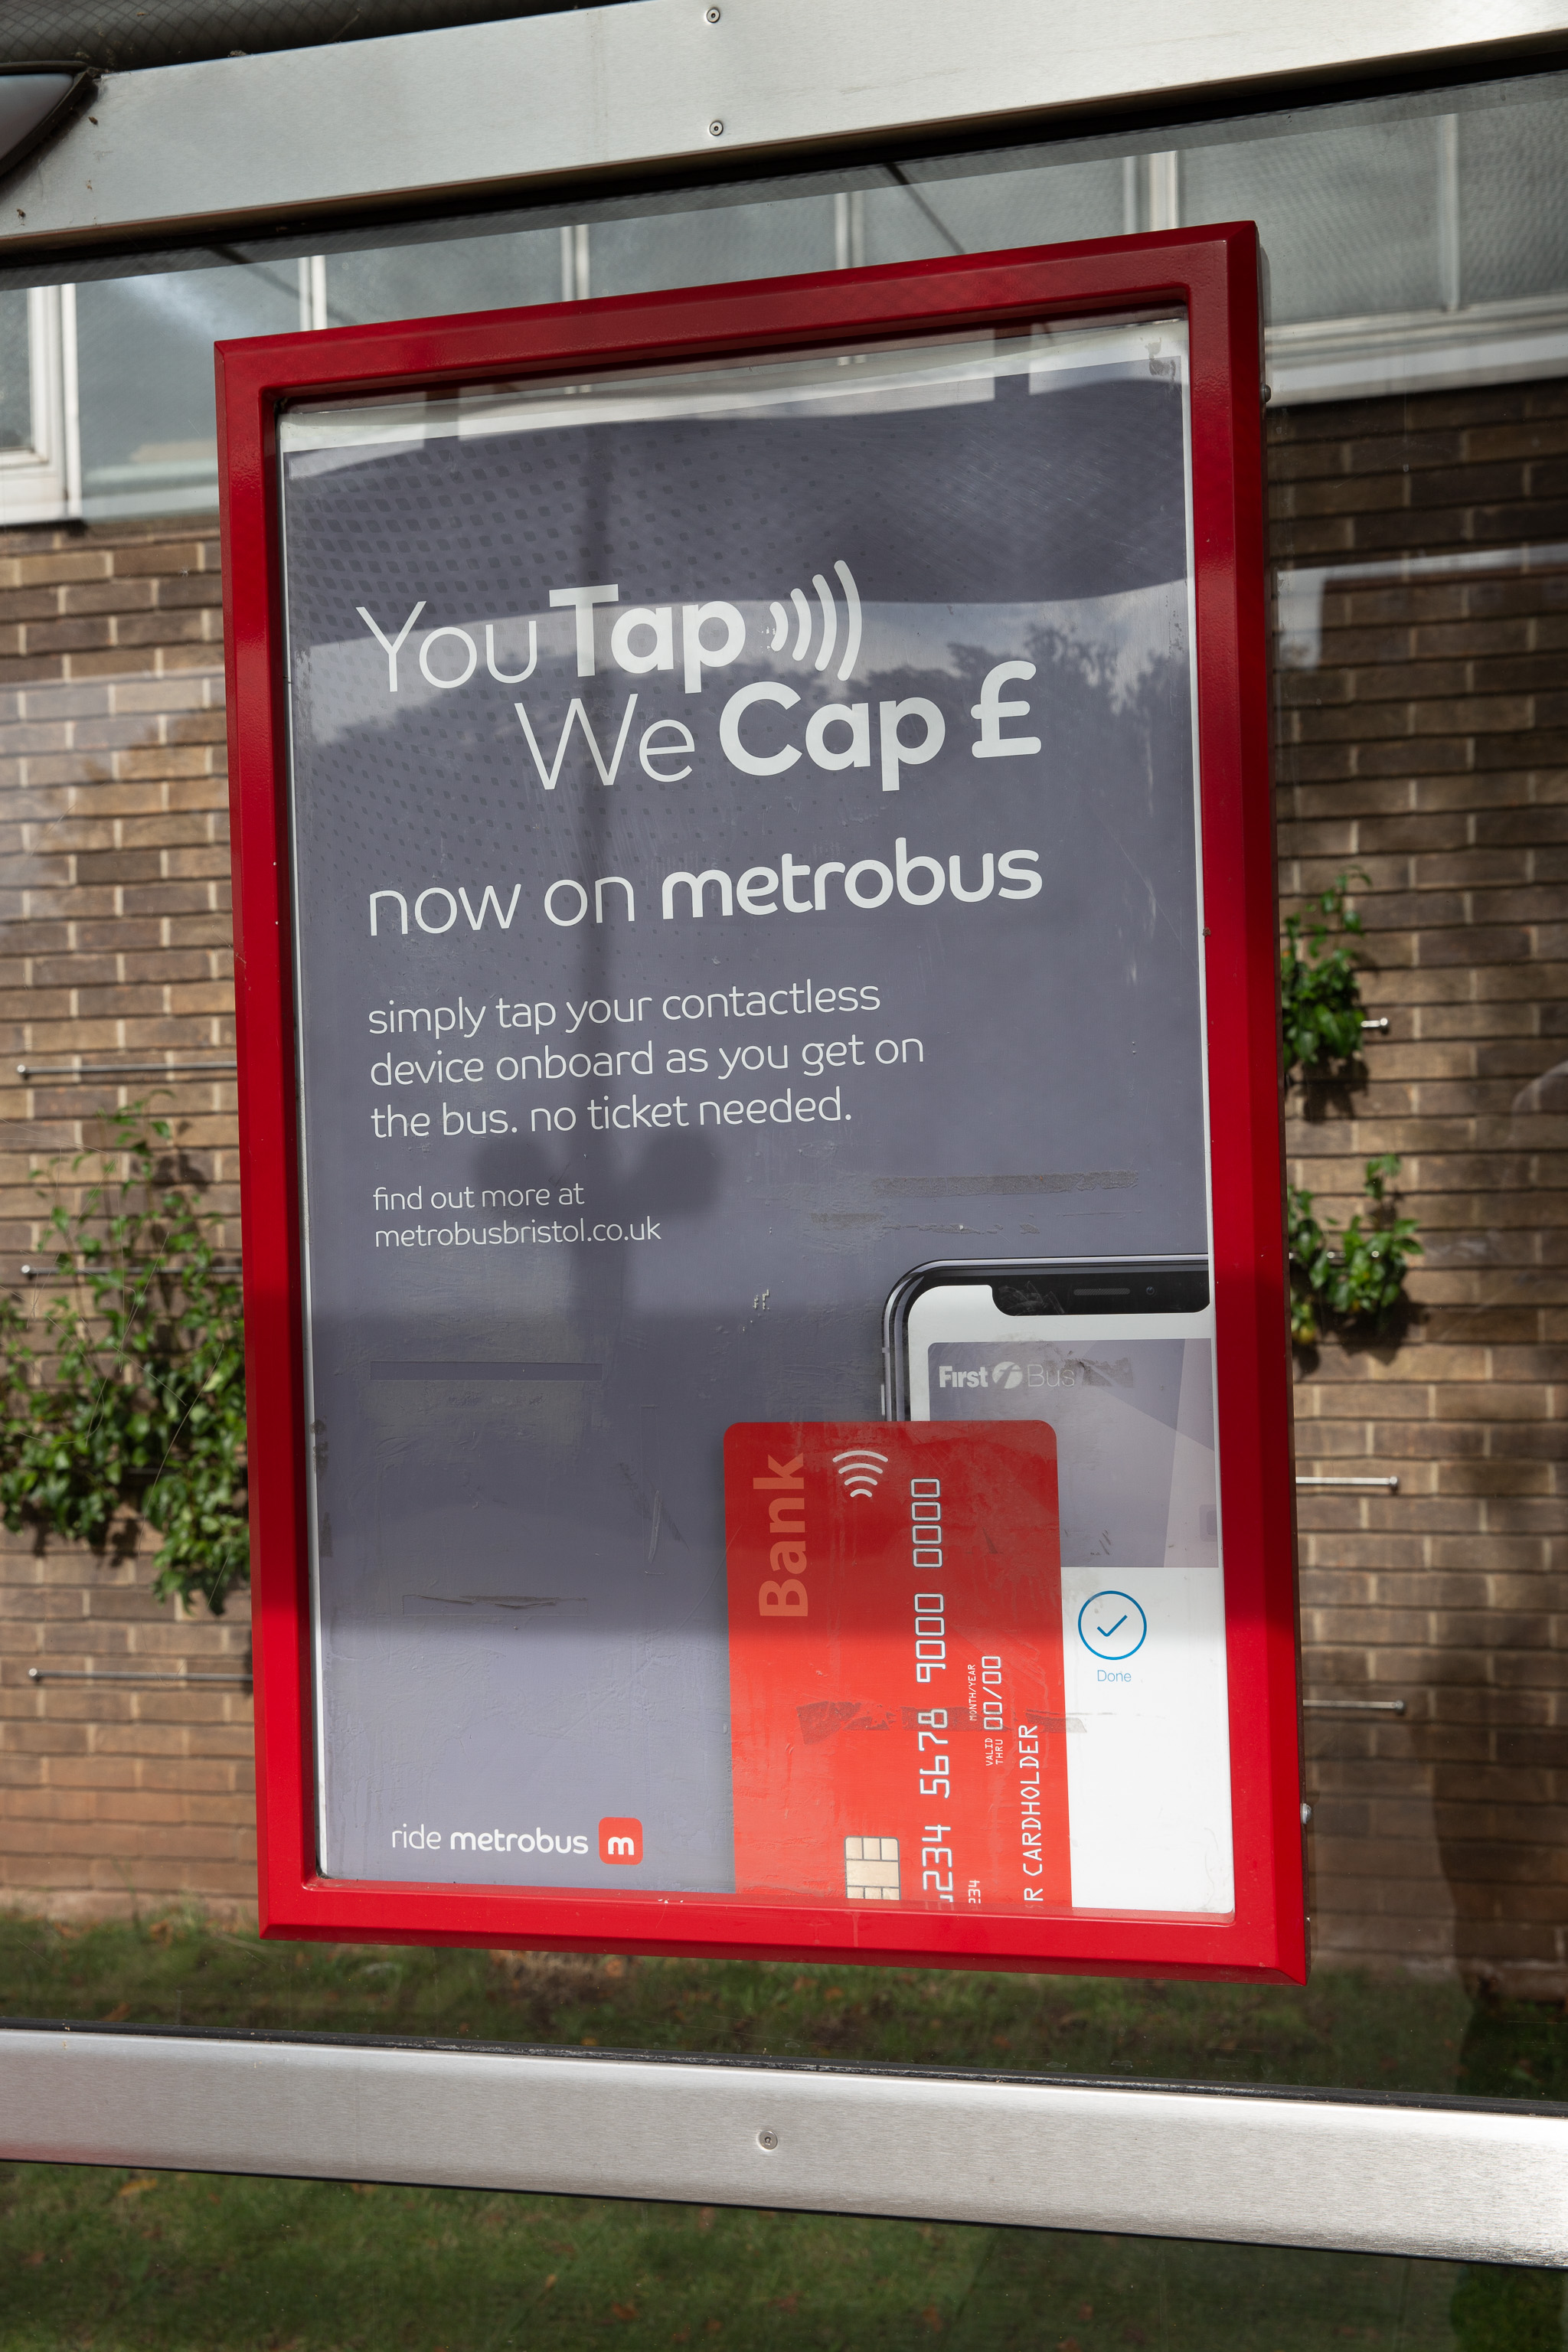 You Tap We Cap
I don't actually know what "we cap £" means. I do know that it always seemed irritating that the Metrobus worked by having to buy a ticket in advan...